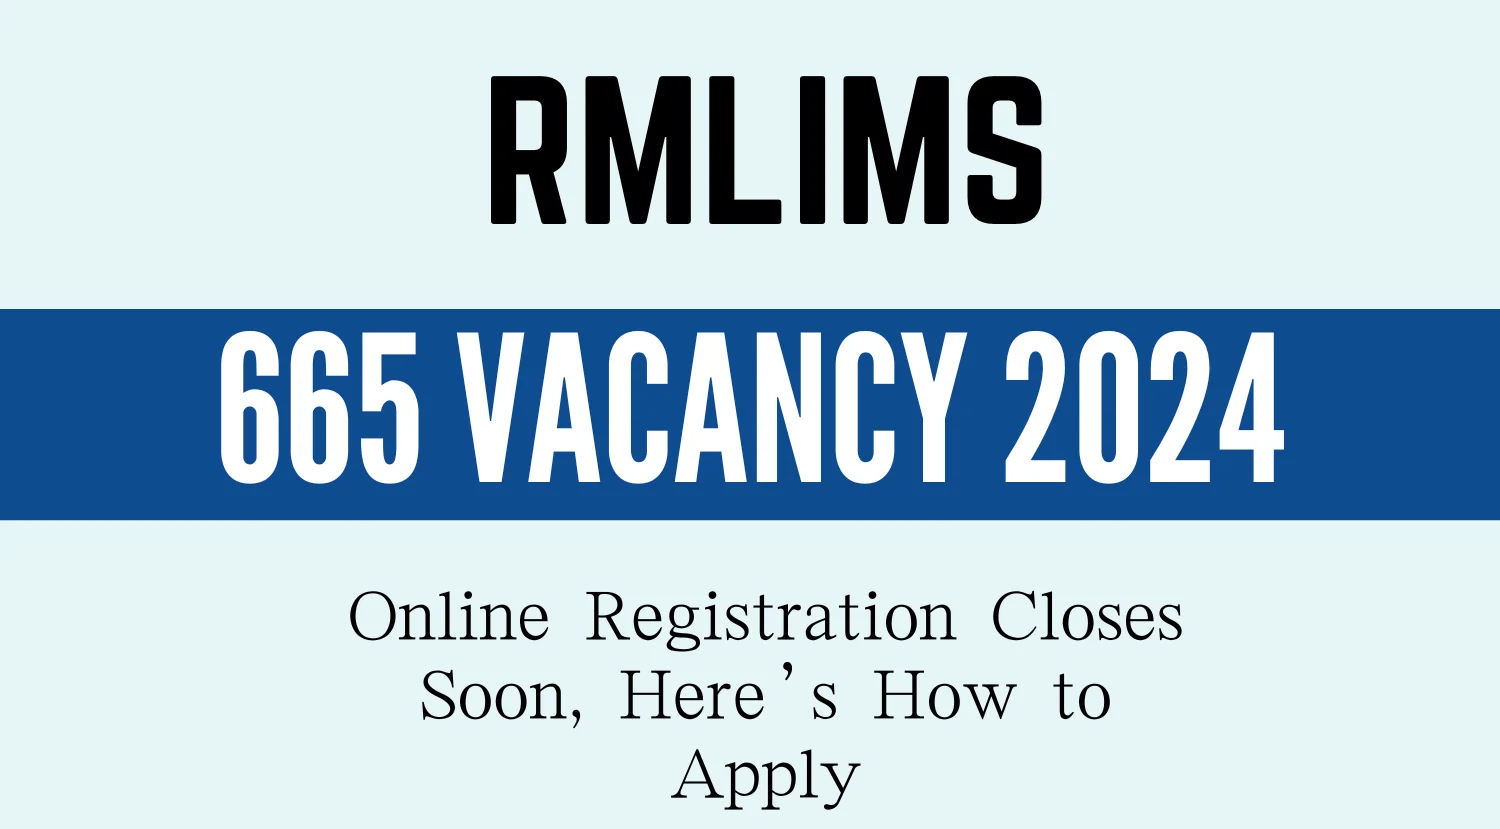 RMLIMS 665 Vacancy 2024 Online Registration Closes Soon Heres How to Apply